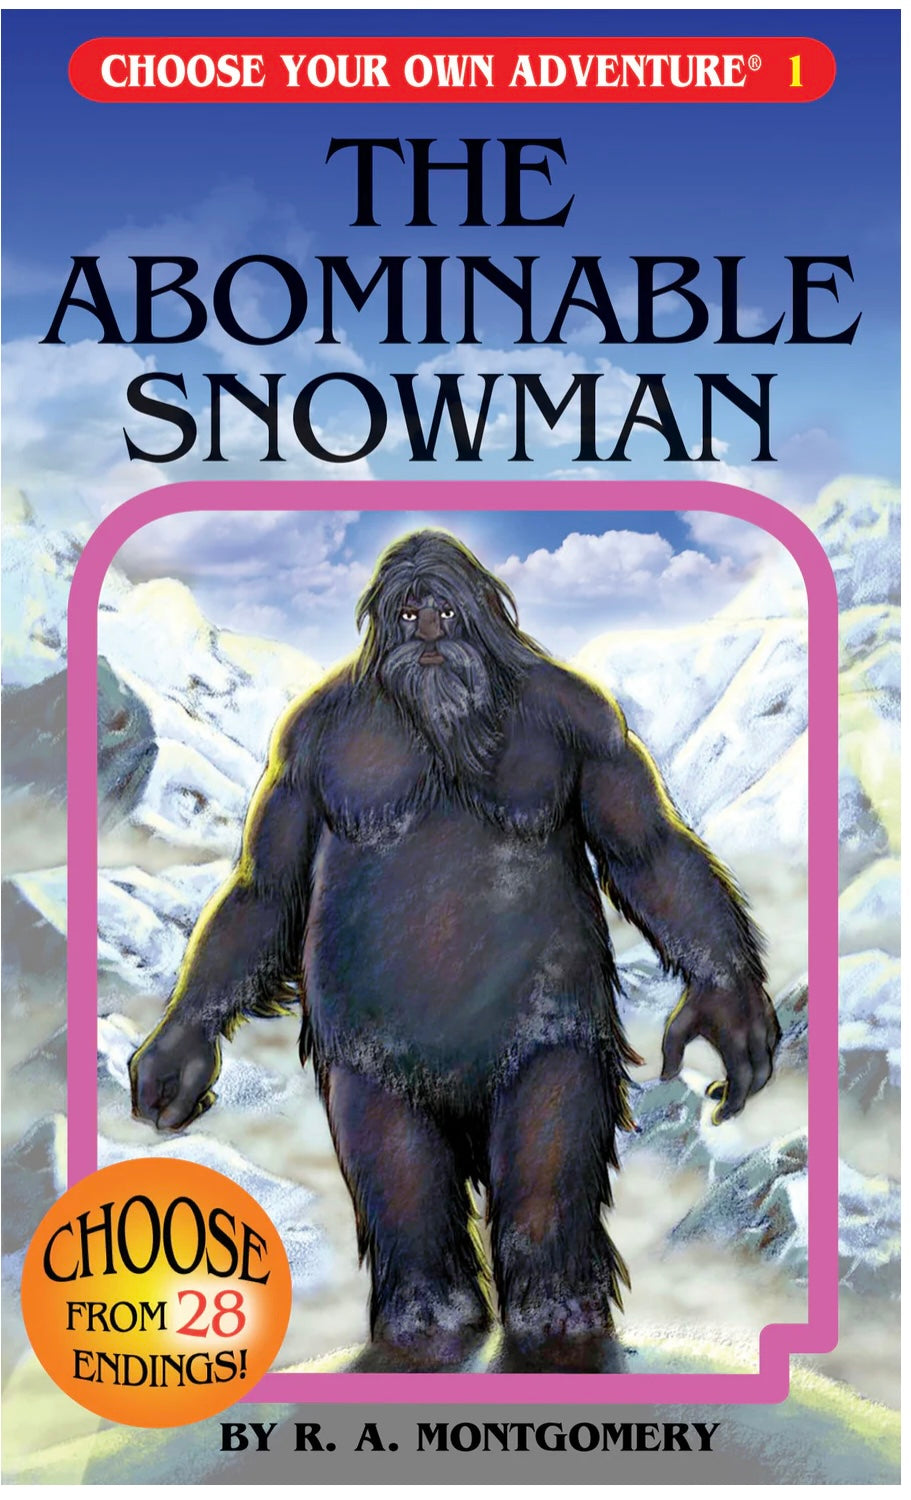 Choose Your Own Adventure-The Abominable Snowman